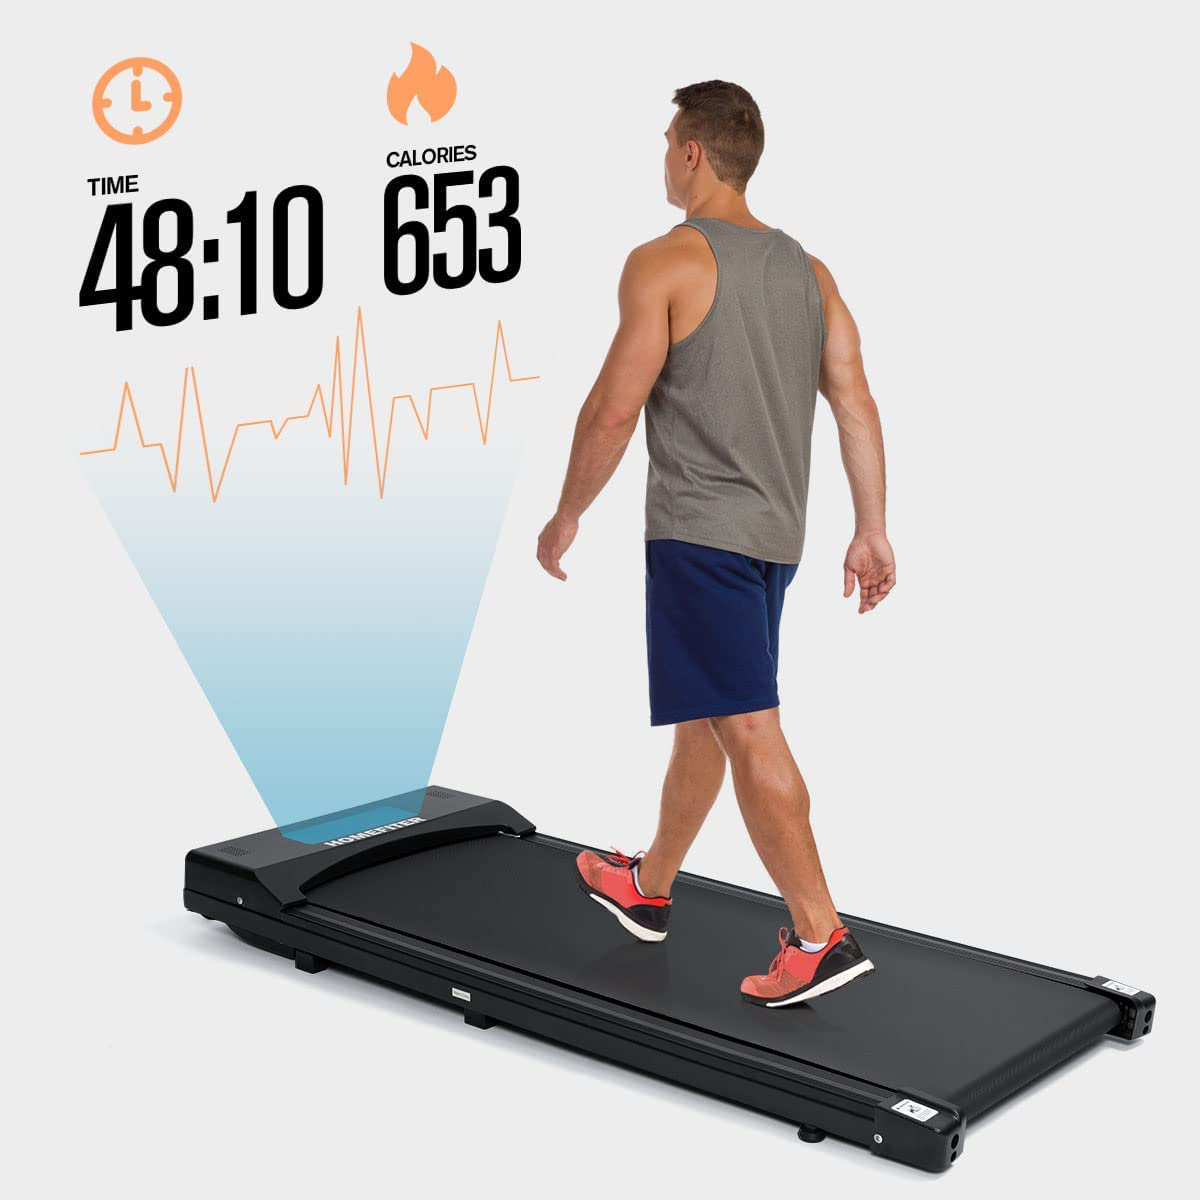 HOMEFITER under Desk Treadmill Portable Electric Treadmill Flat Slim Walking Pad Jogging Running Machine for Home/Office Use, Remote Control, LED Display, Installation Free for Women Men Animals & Pet Supplies > Pet Supplies > Dog Supplies > Dog Treadmills HOMEFITER   